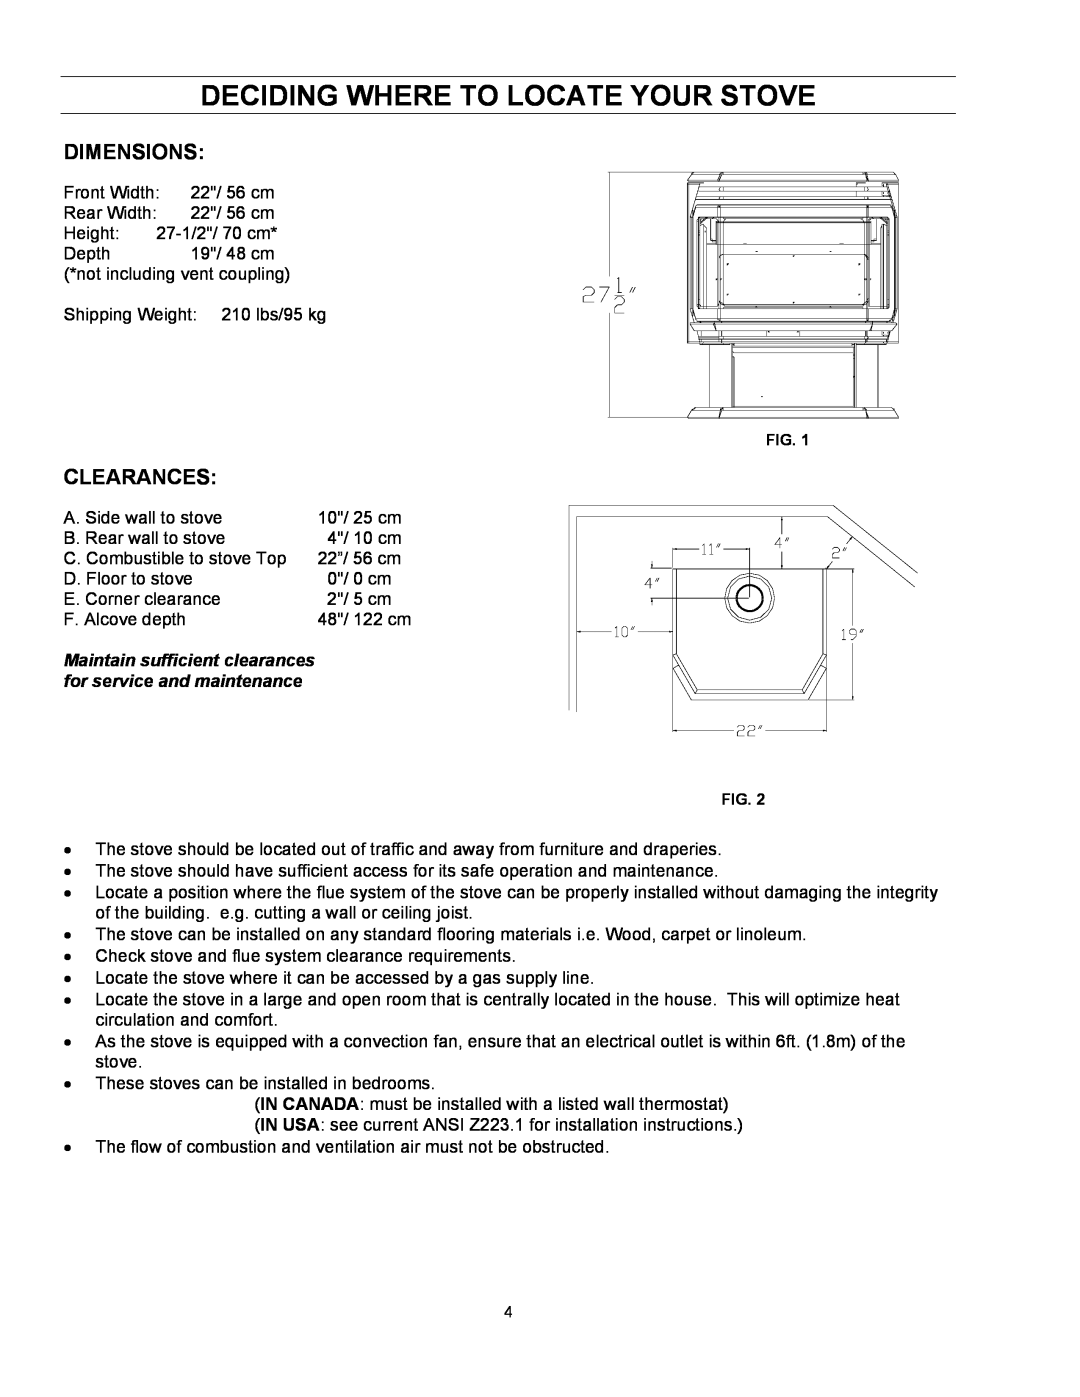 Enviro EG 28 owner manual Deciding Where To Locate Your Stove, Dimensions, Clearances 